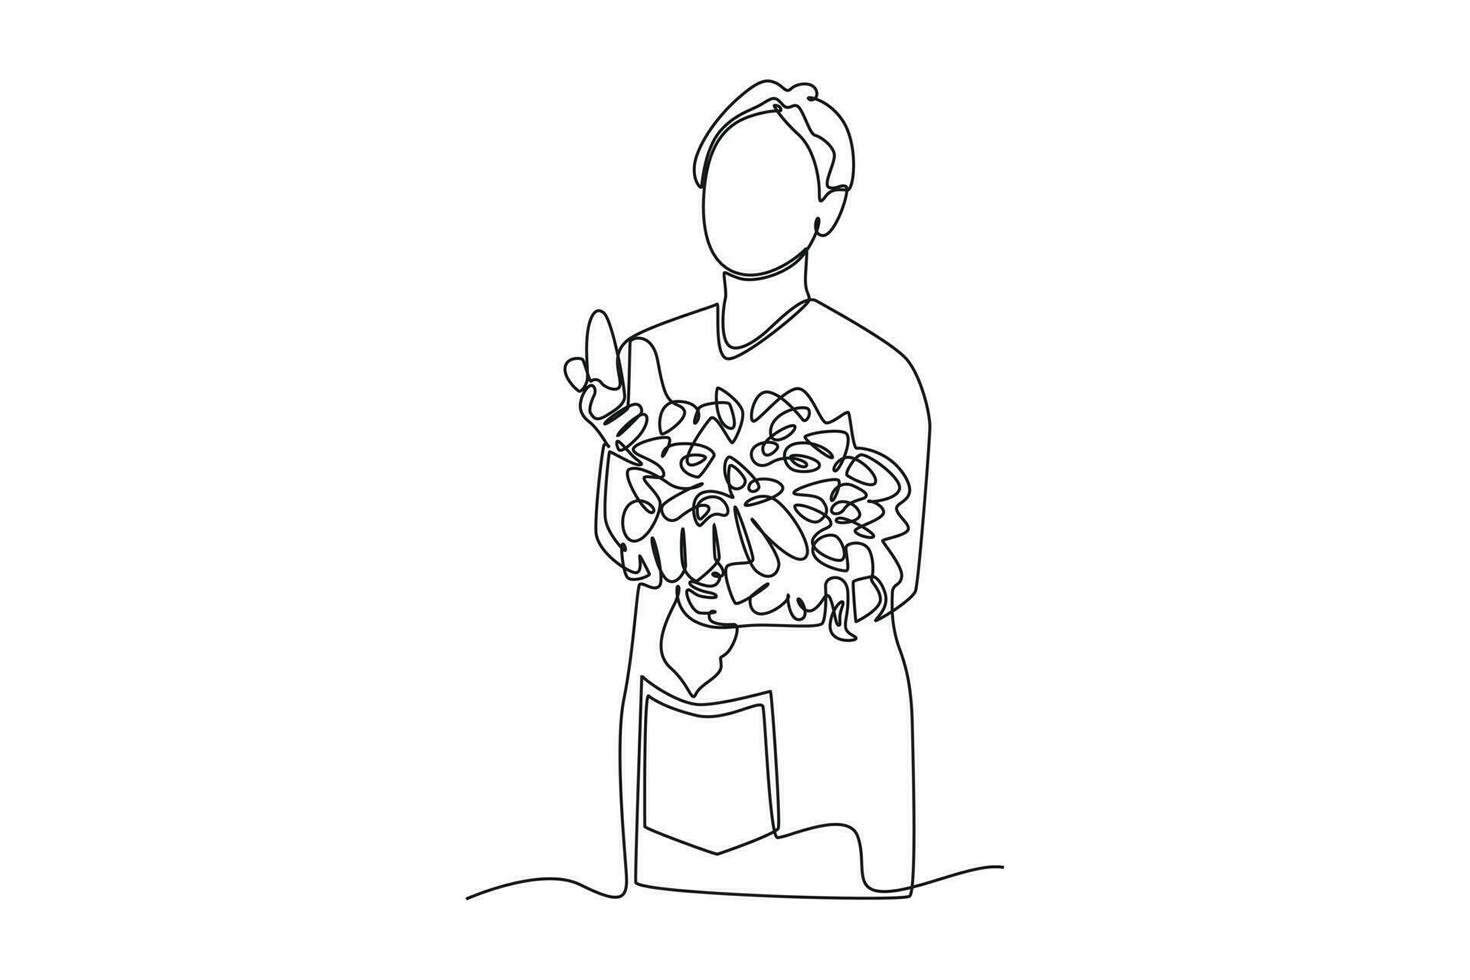 Continuous one line drawing happy woman brings a lot of vegetable in basket. Business activity concept in market. Single line draw design vector graphic illustration.